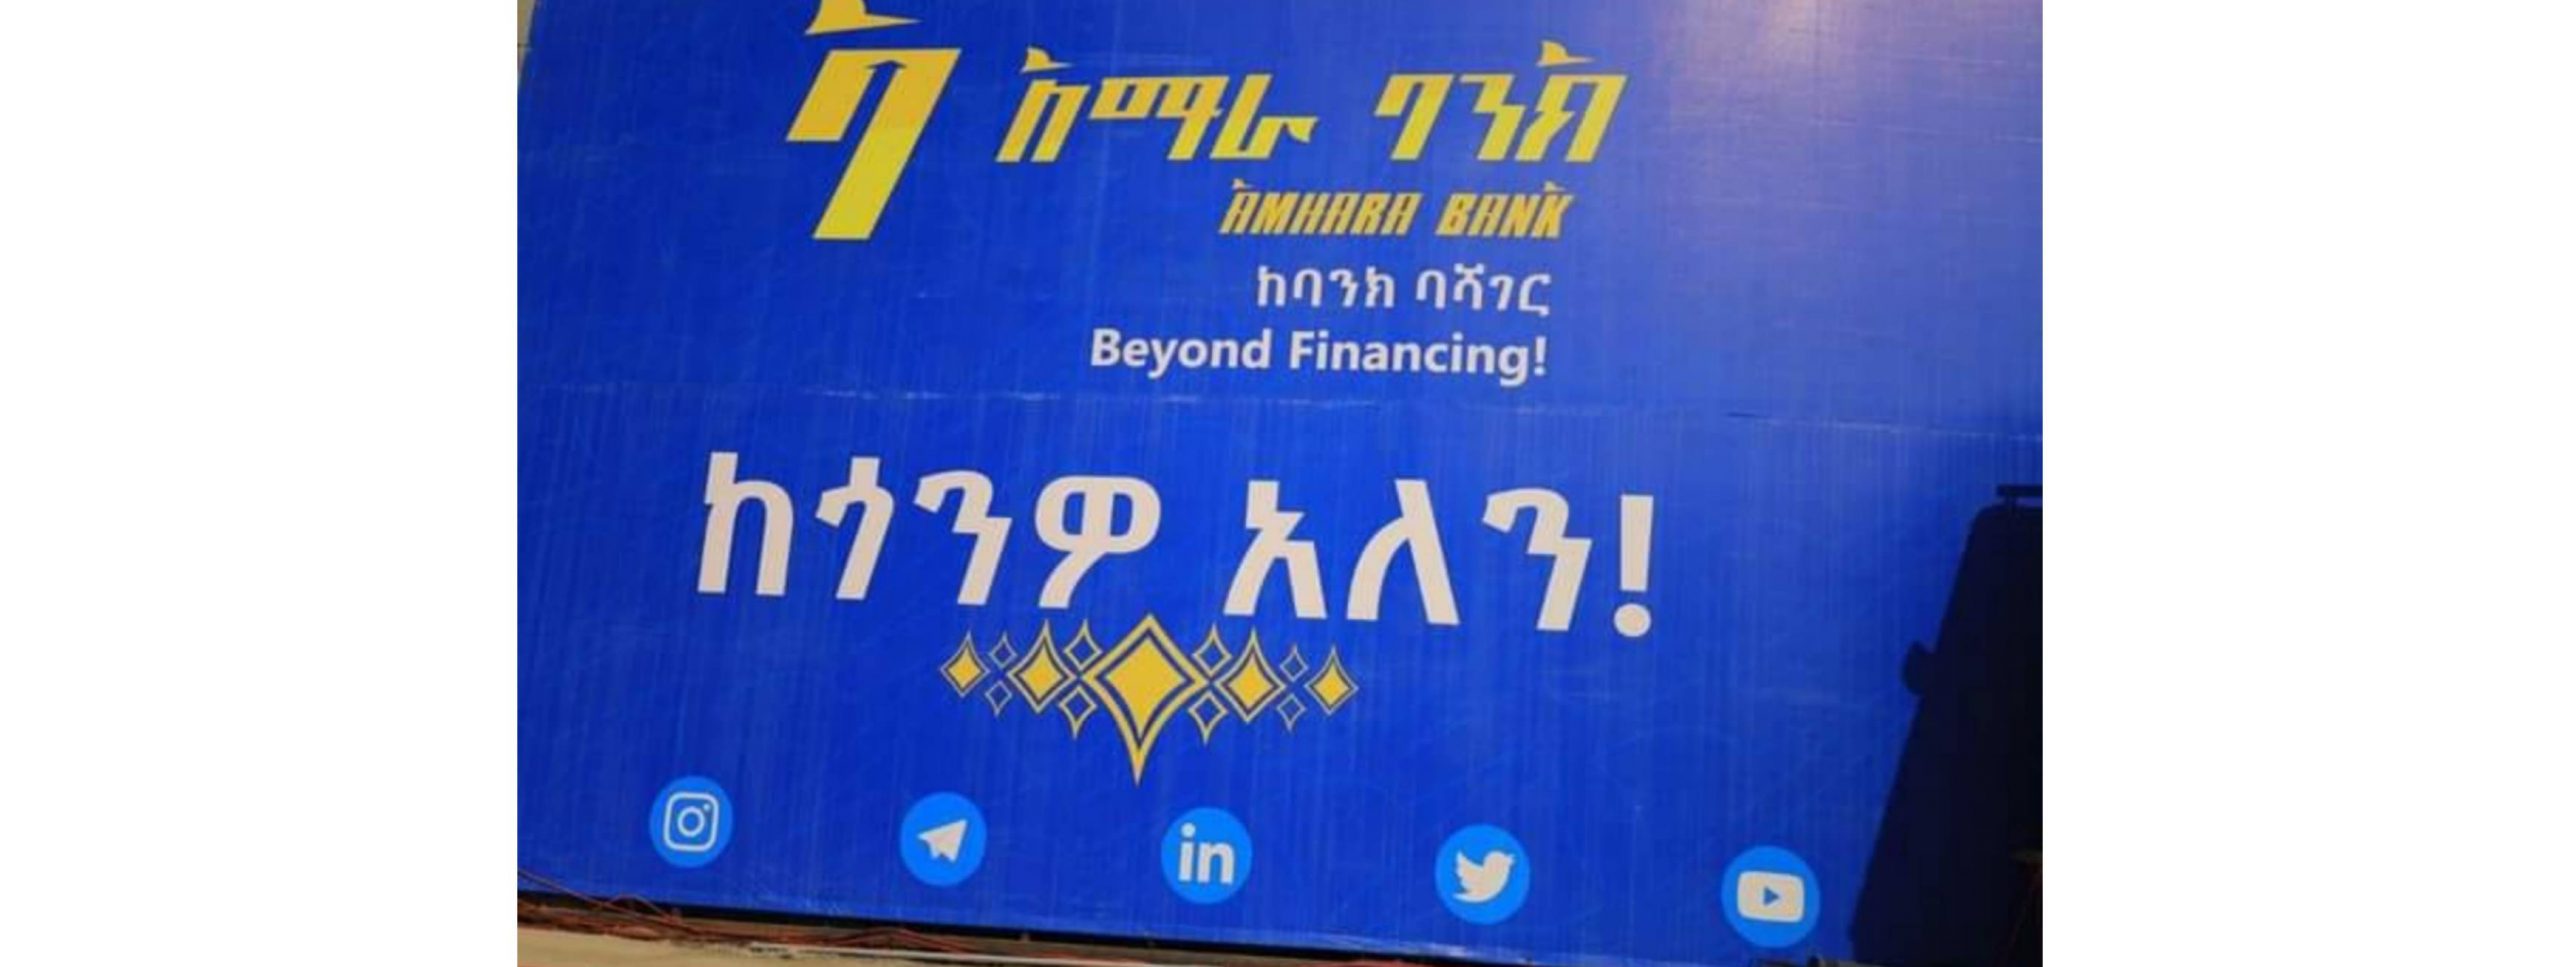 Amhara Bank: The Latest Addition to the Banking Sector